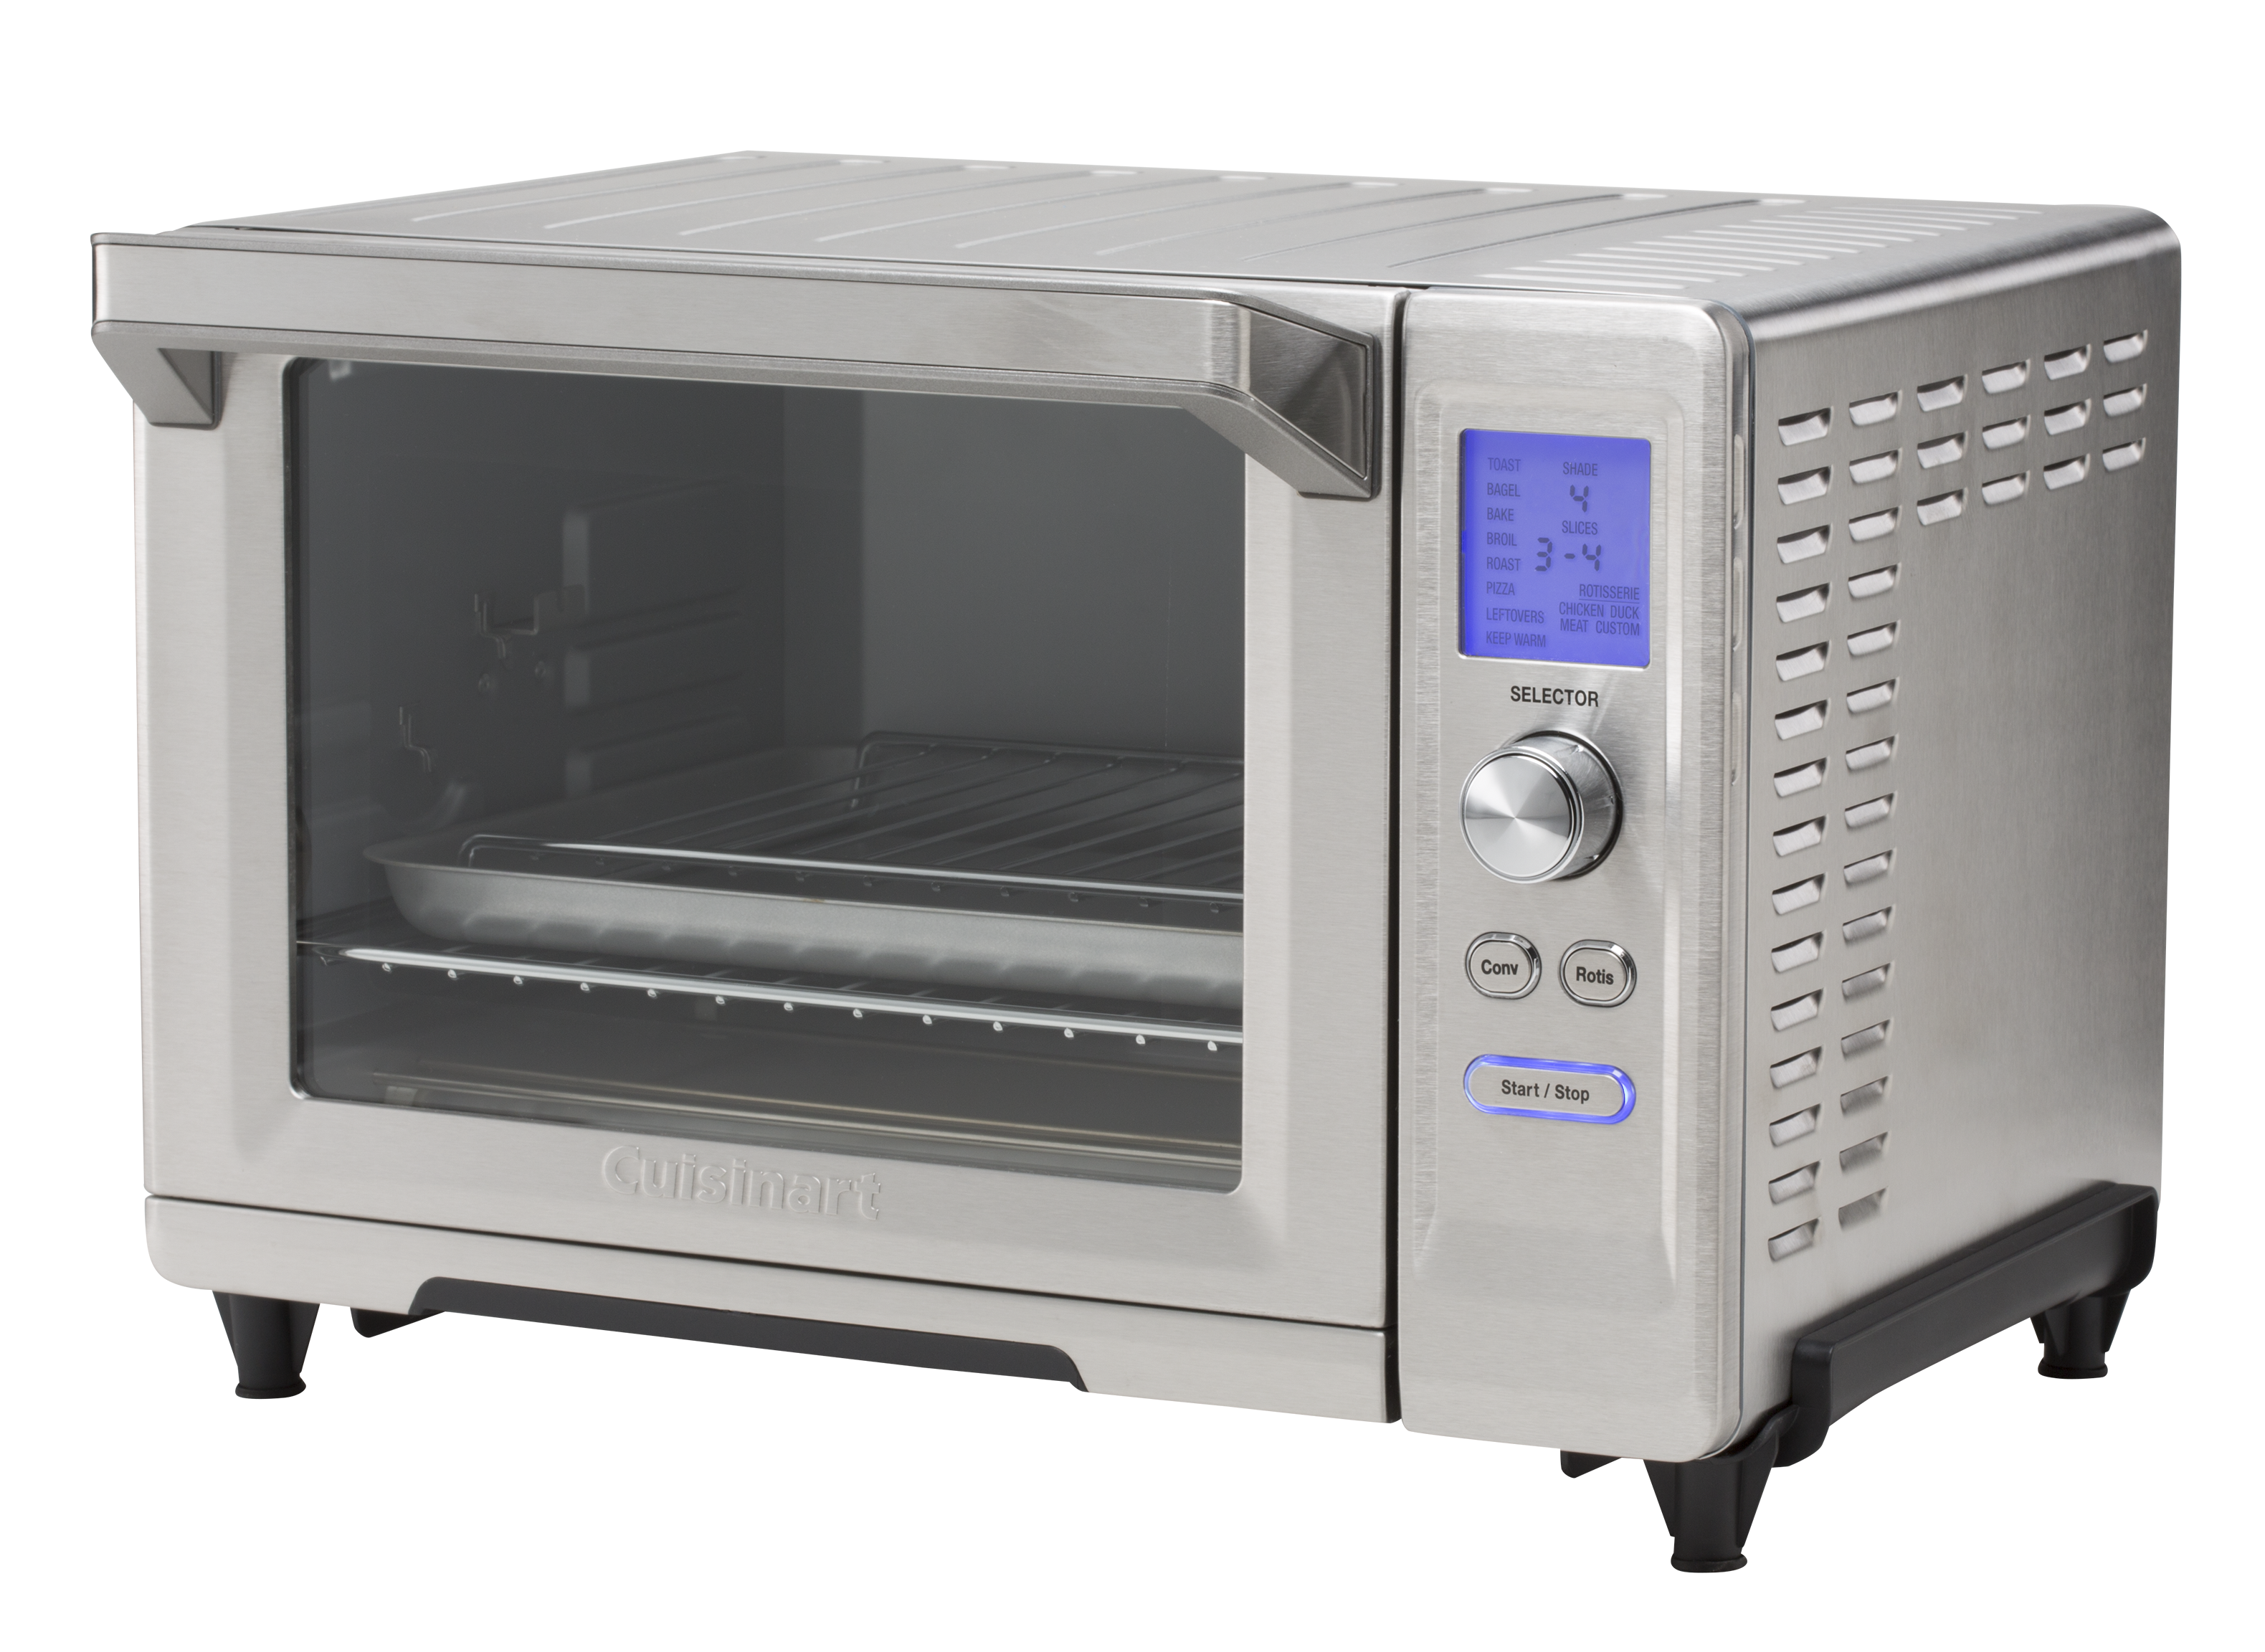 https://crdms.images.consumerreports.org/prod/products/cr/models/384786-toasterovens-cuisinart-rotisserieconvectiontob200oven.png